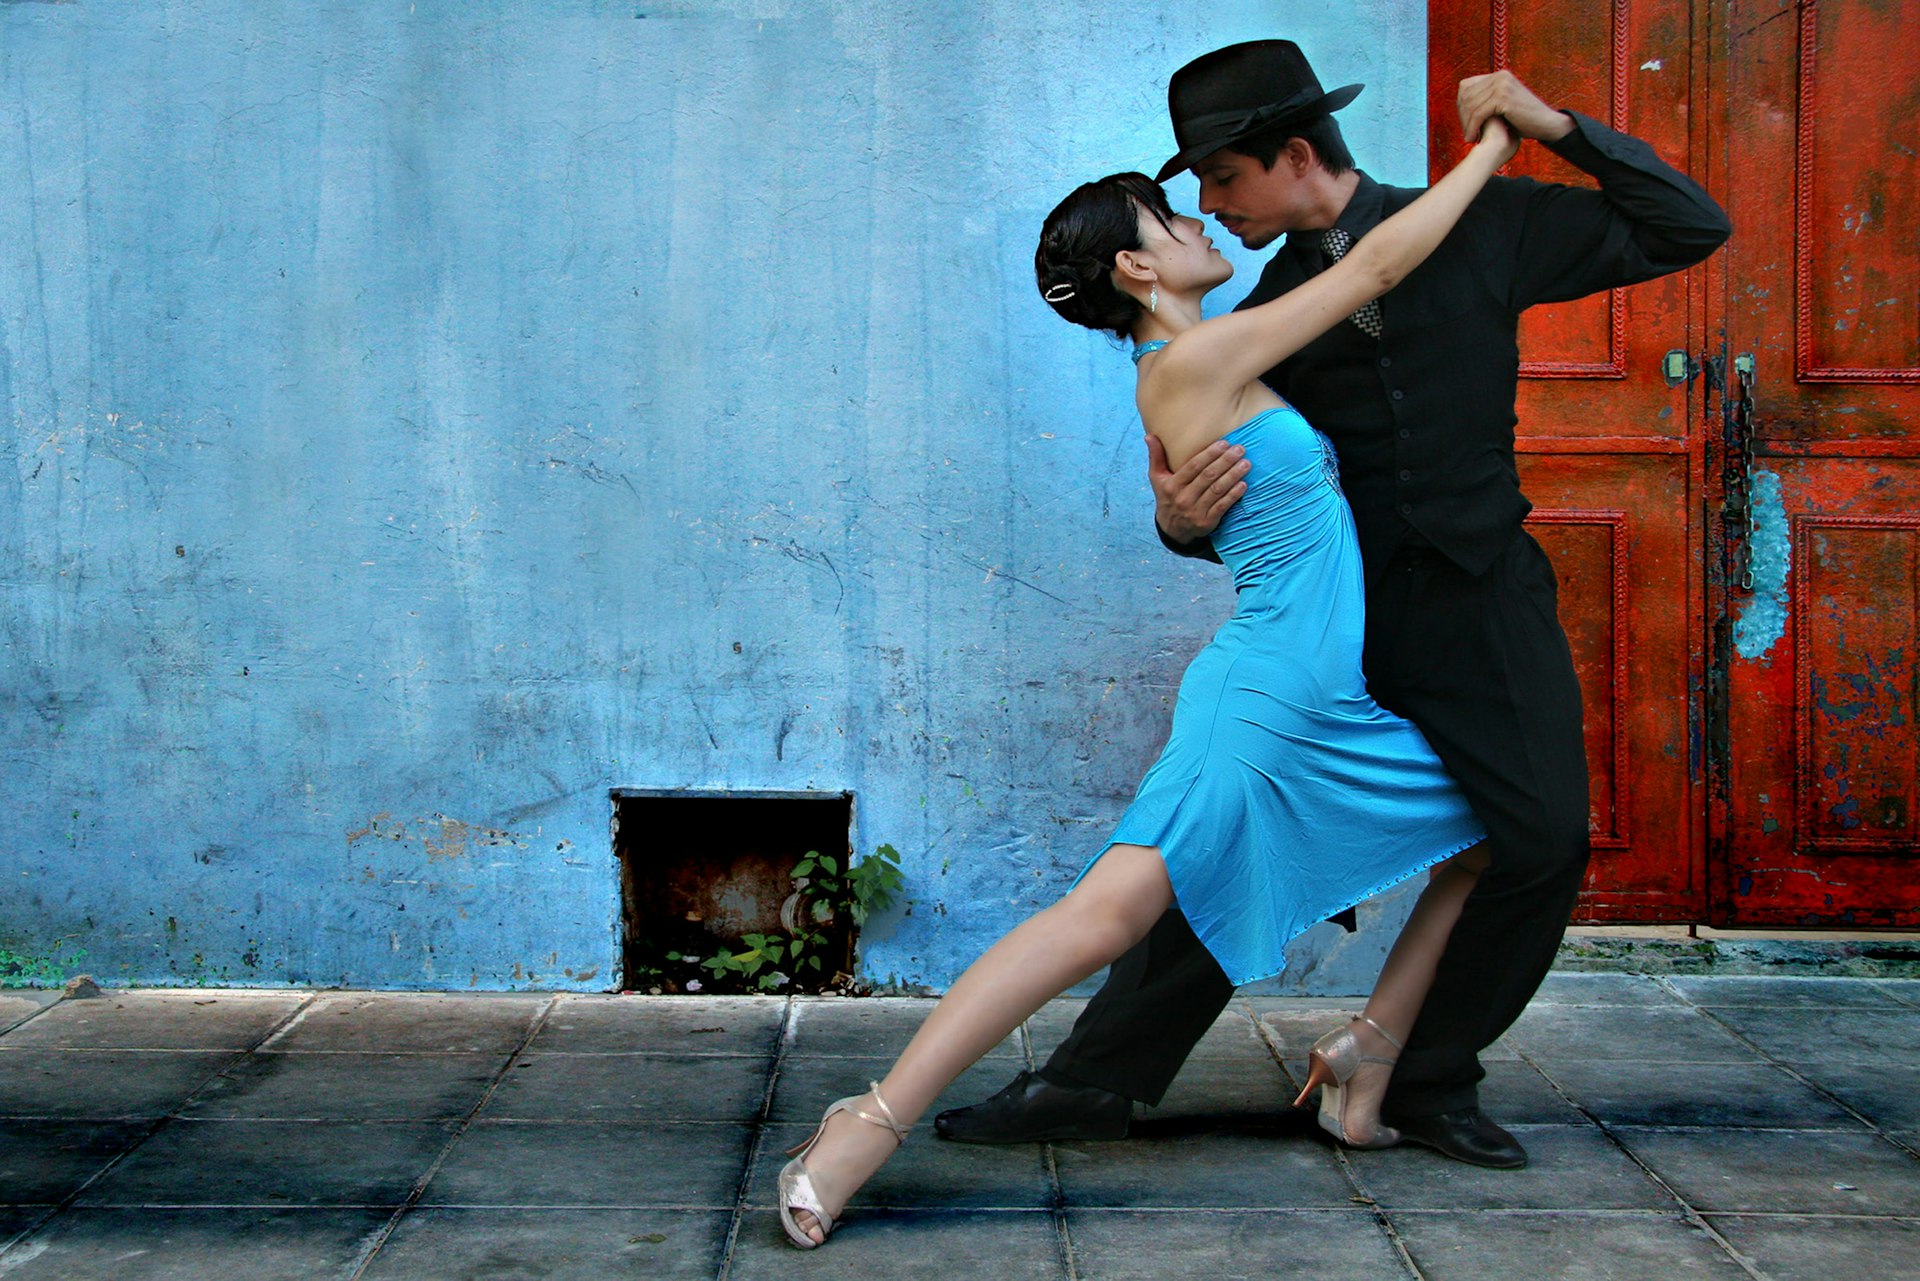 Two tango dancers against a painted wall in a street